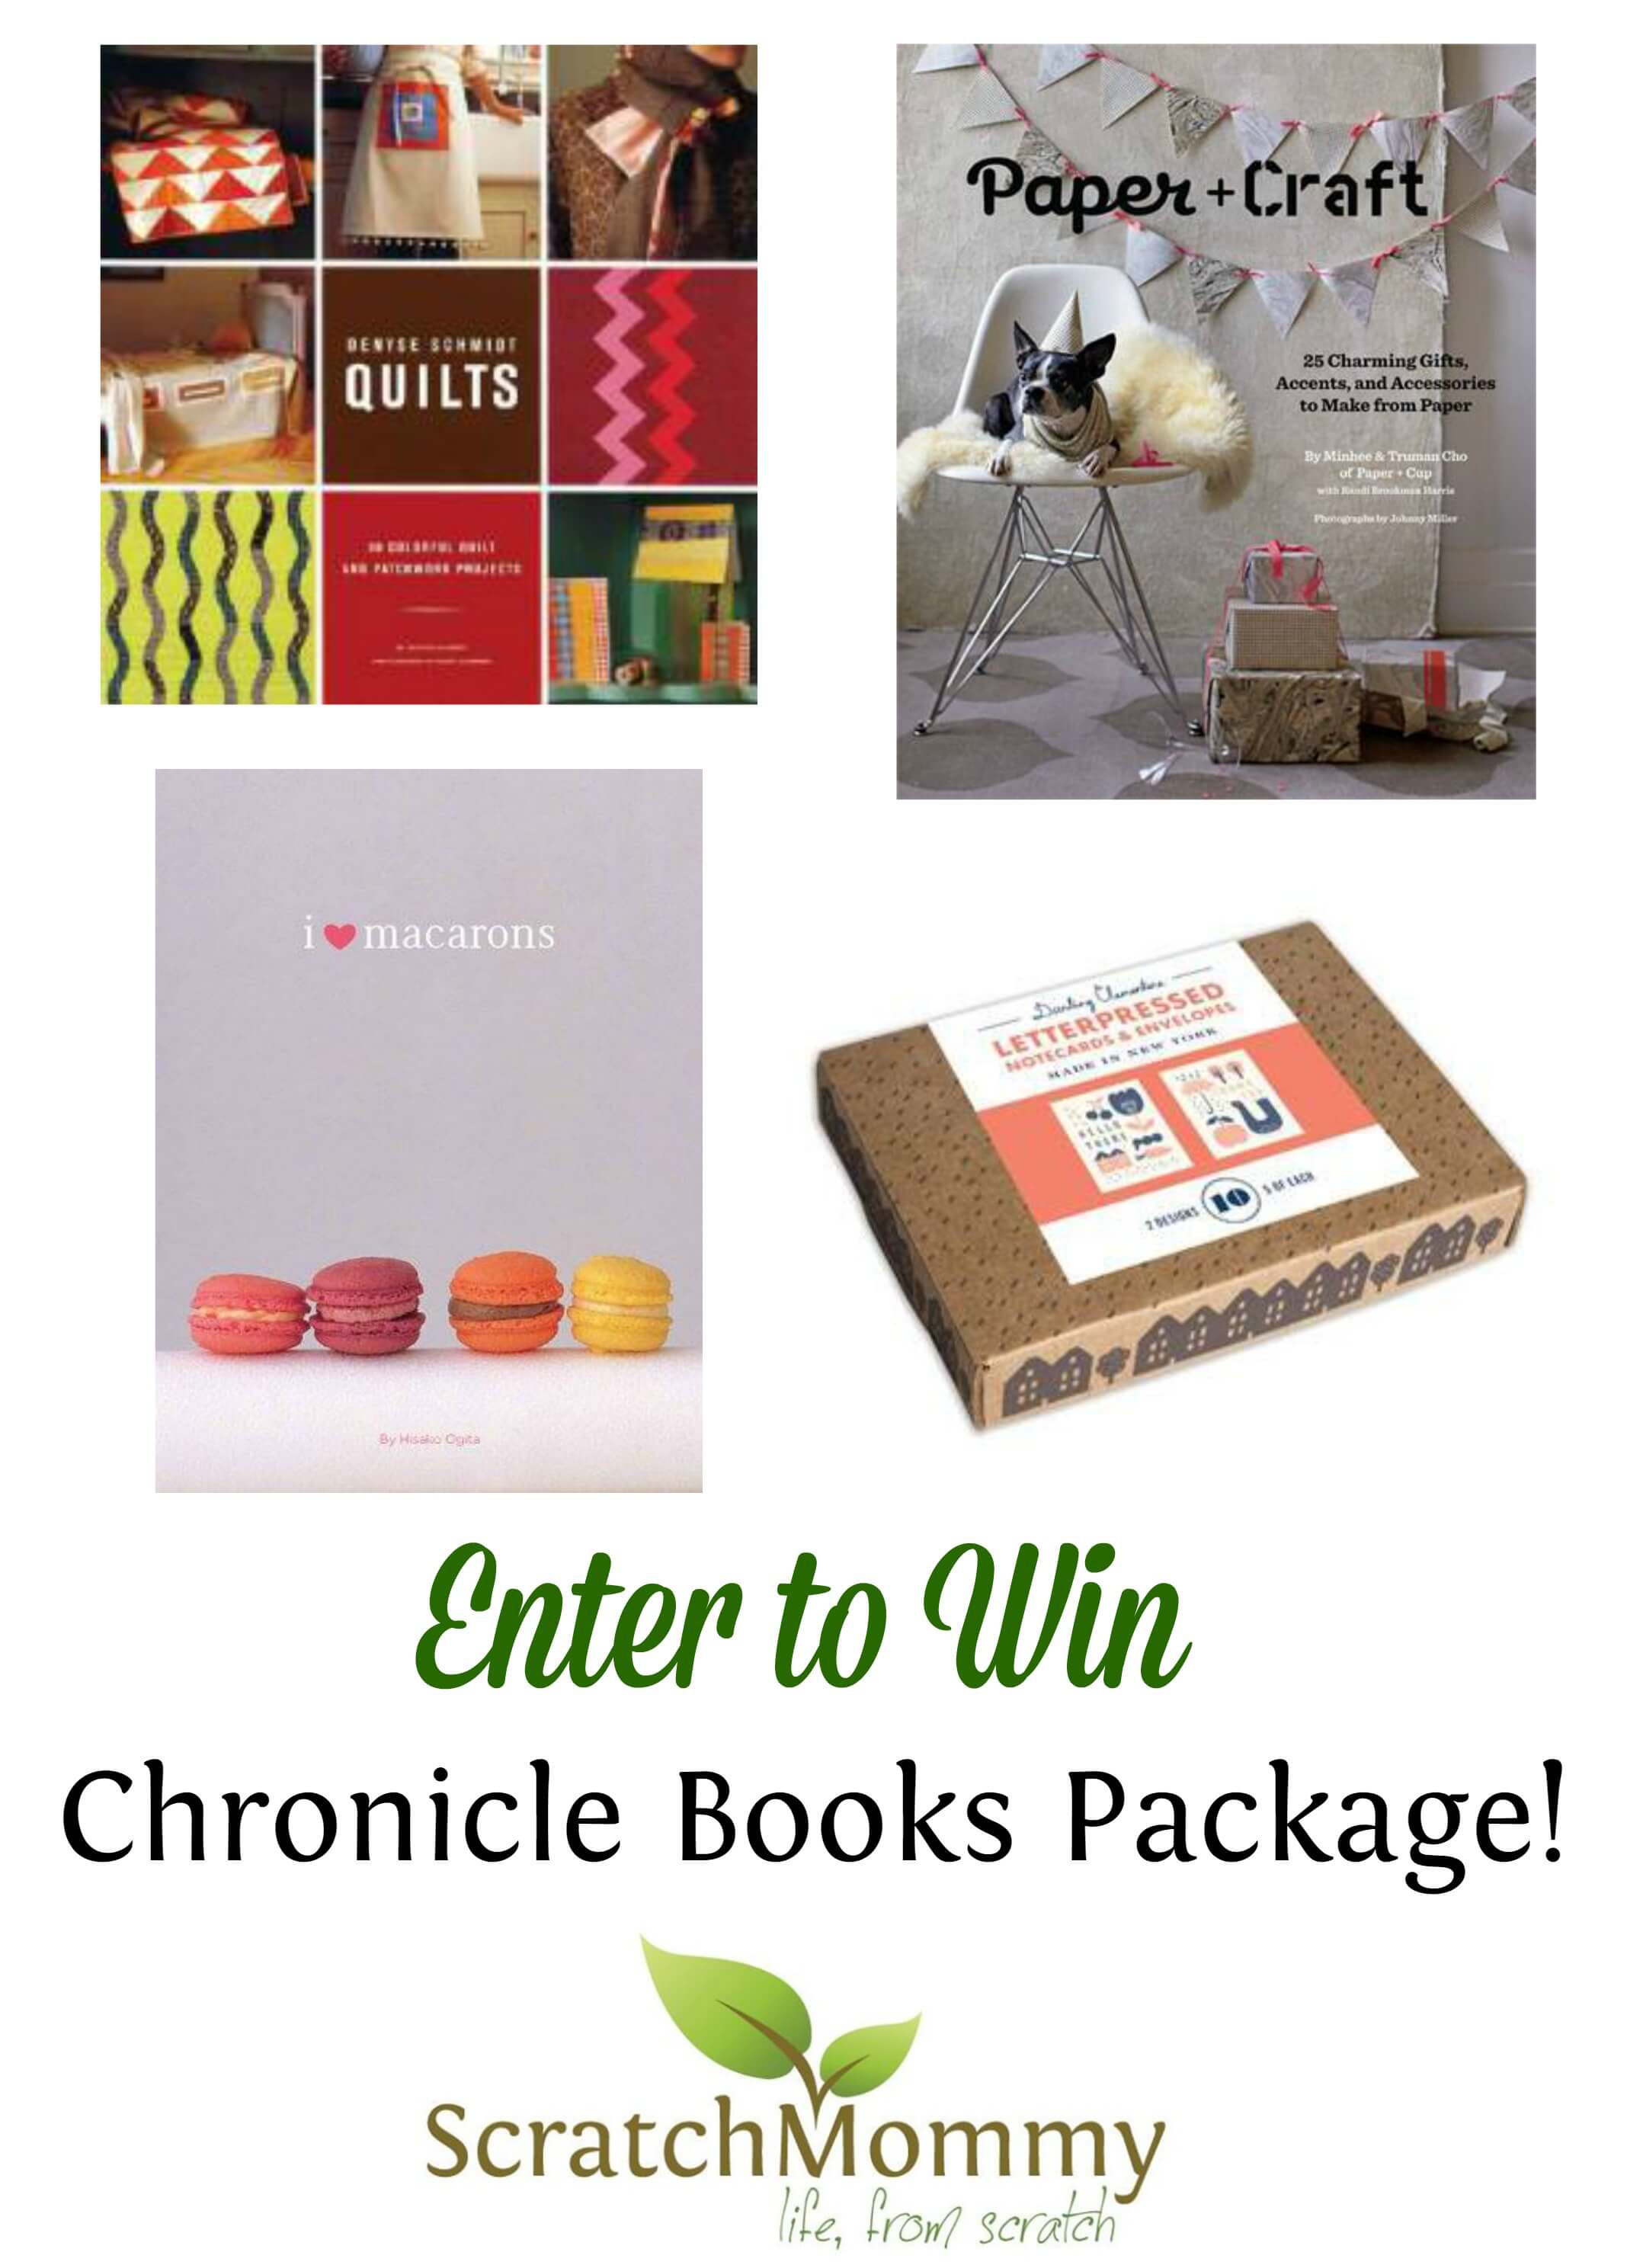 Scratch Mommy continues their launch festivities with a DIY & Craft Book Giveaway from Chronicle Books.